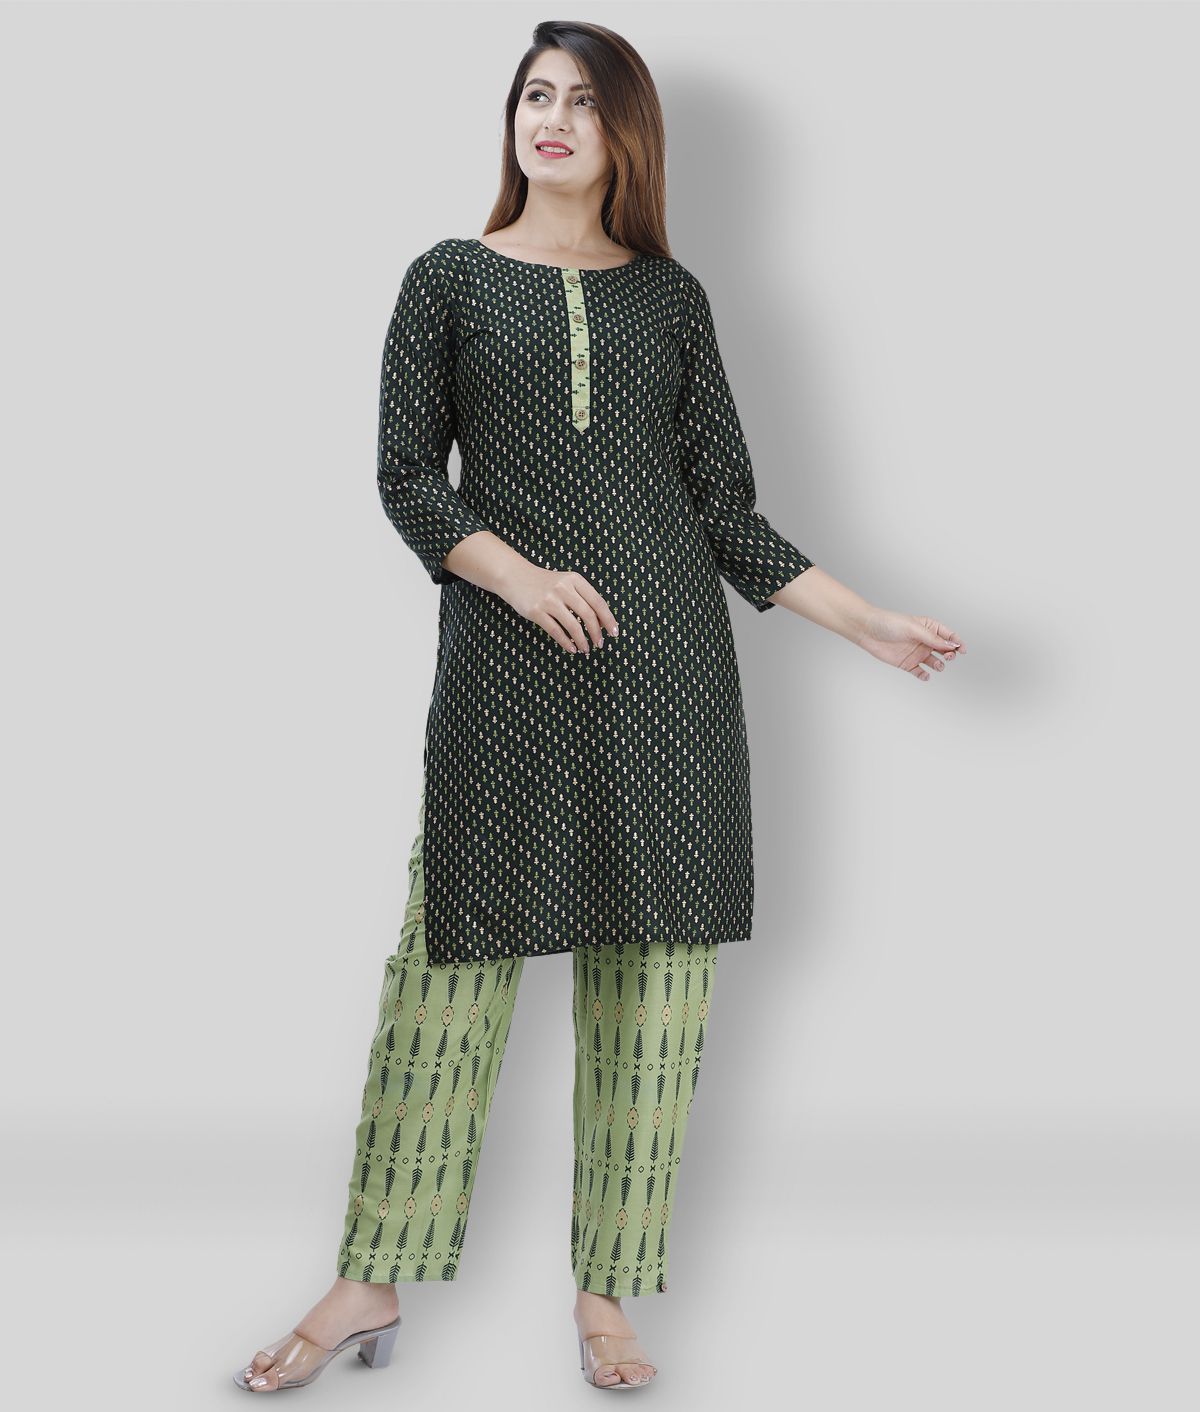     			JC4U - Green Straight Rayon Women's Stitched Salwar Suit ( Pack of 1 )